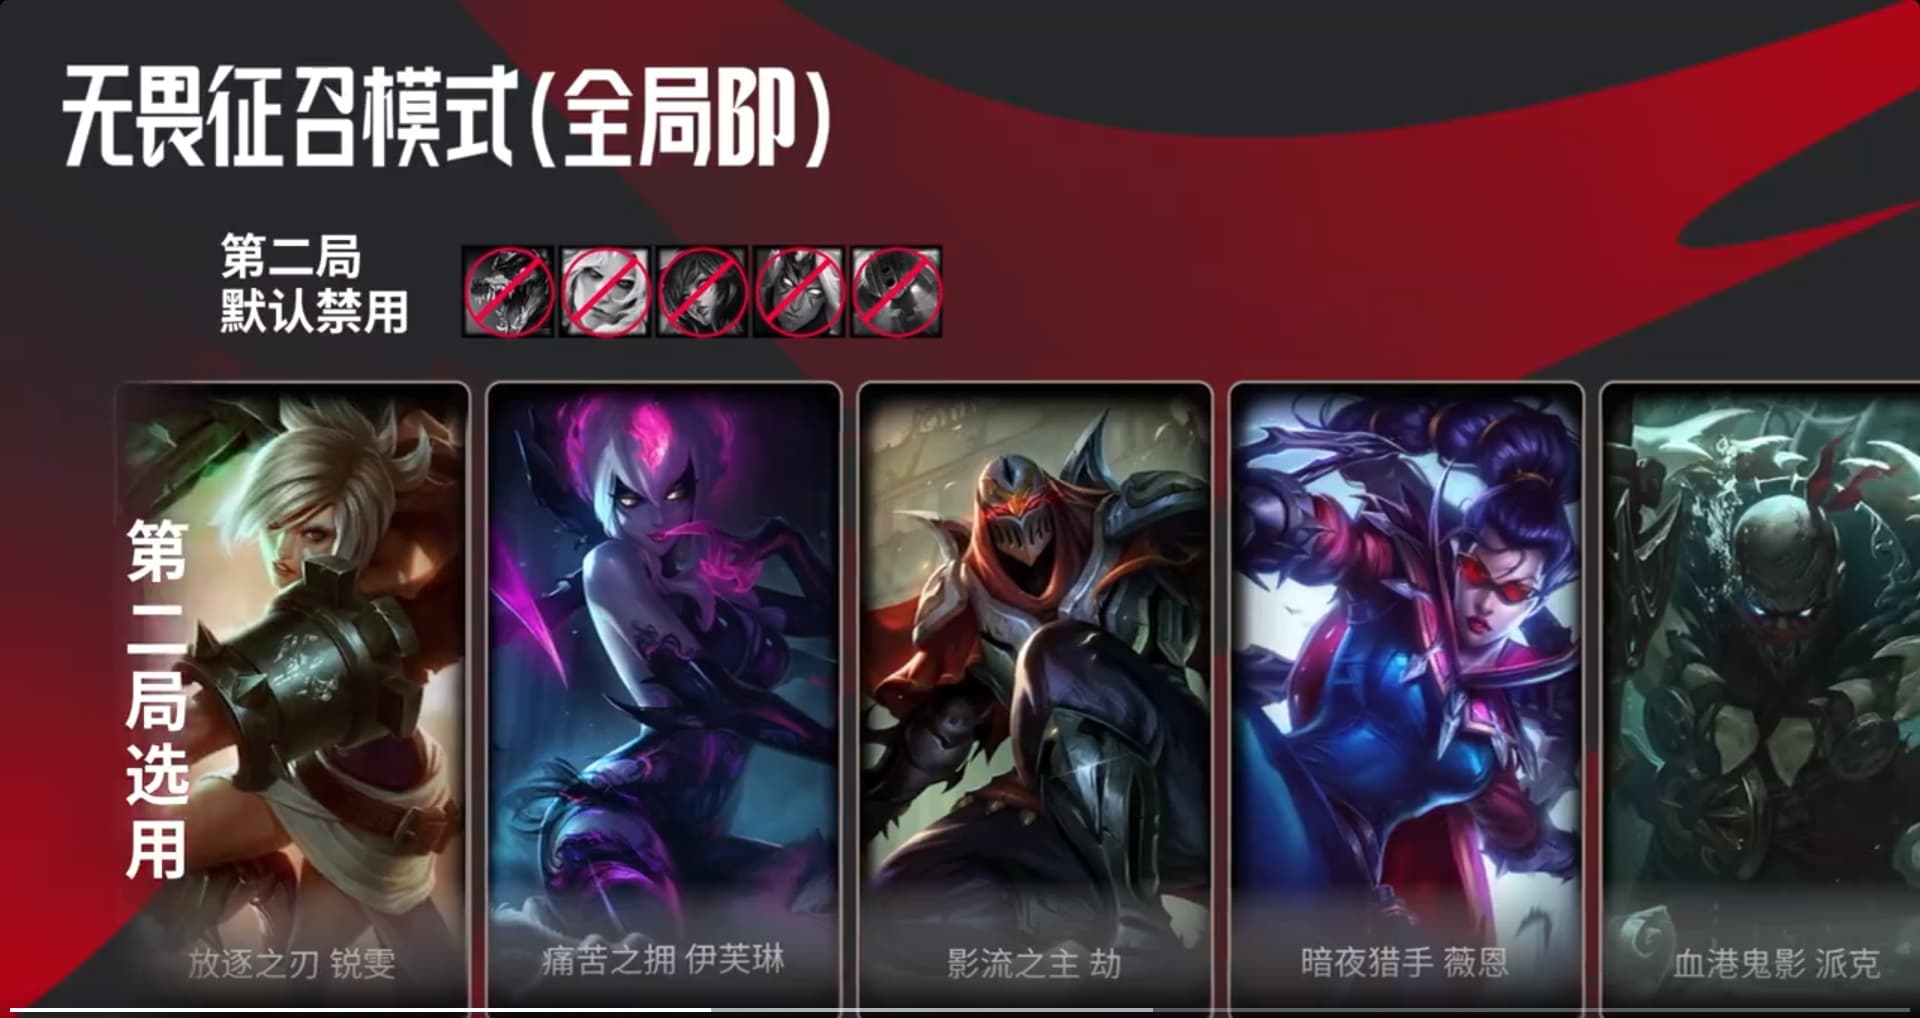 LPL officially announced that the new format will be used for the Summer Split.